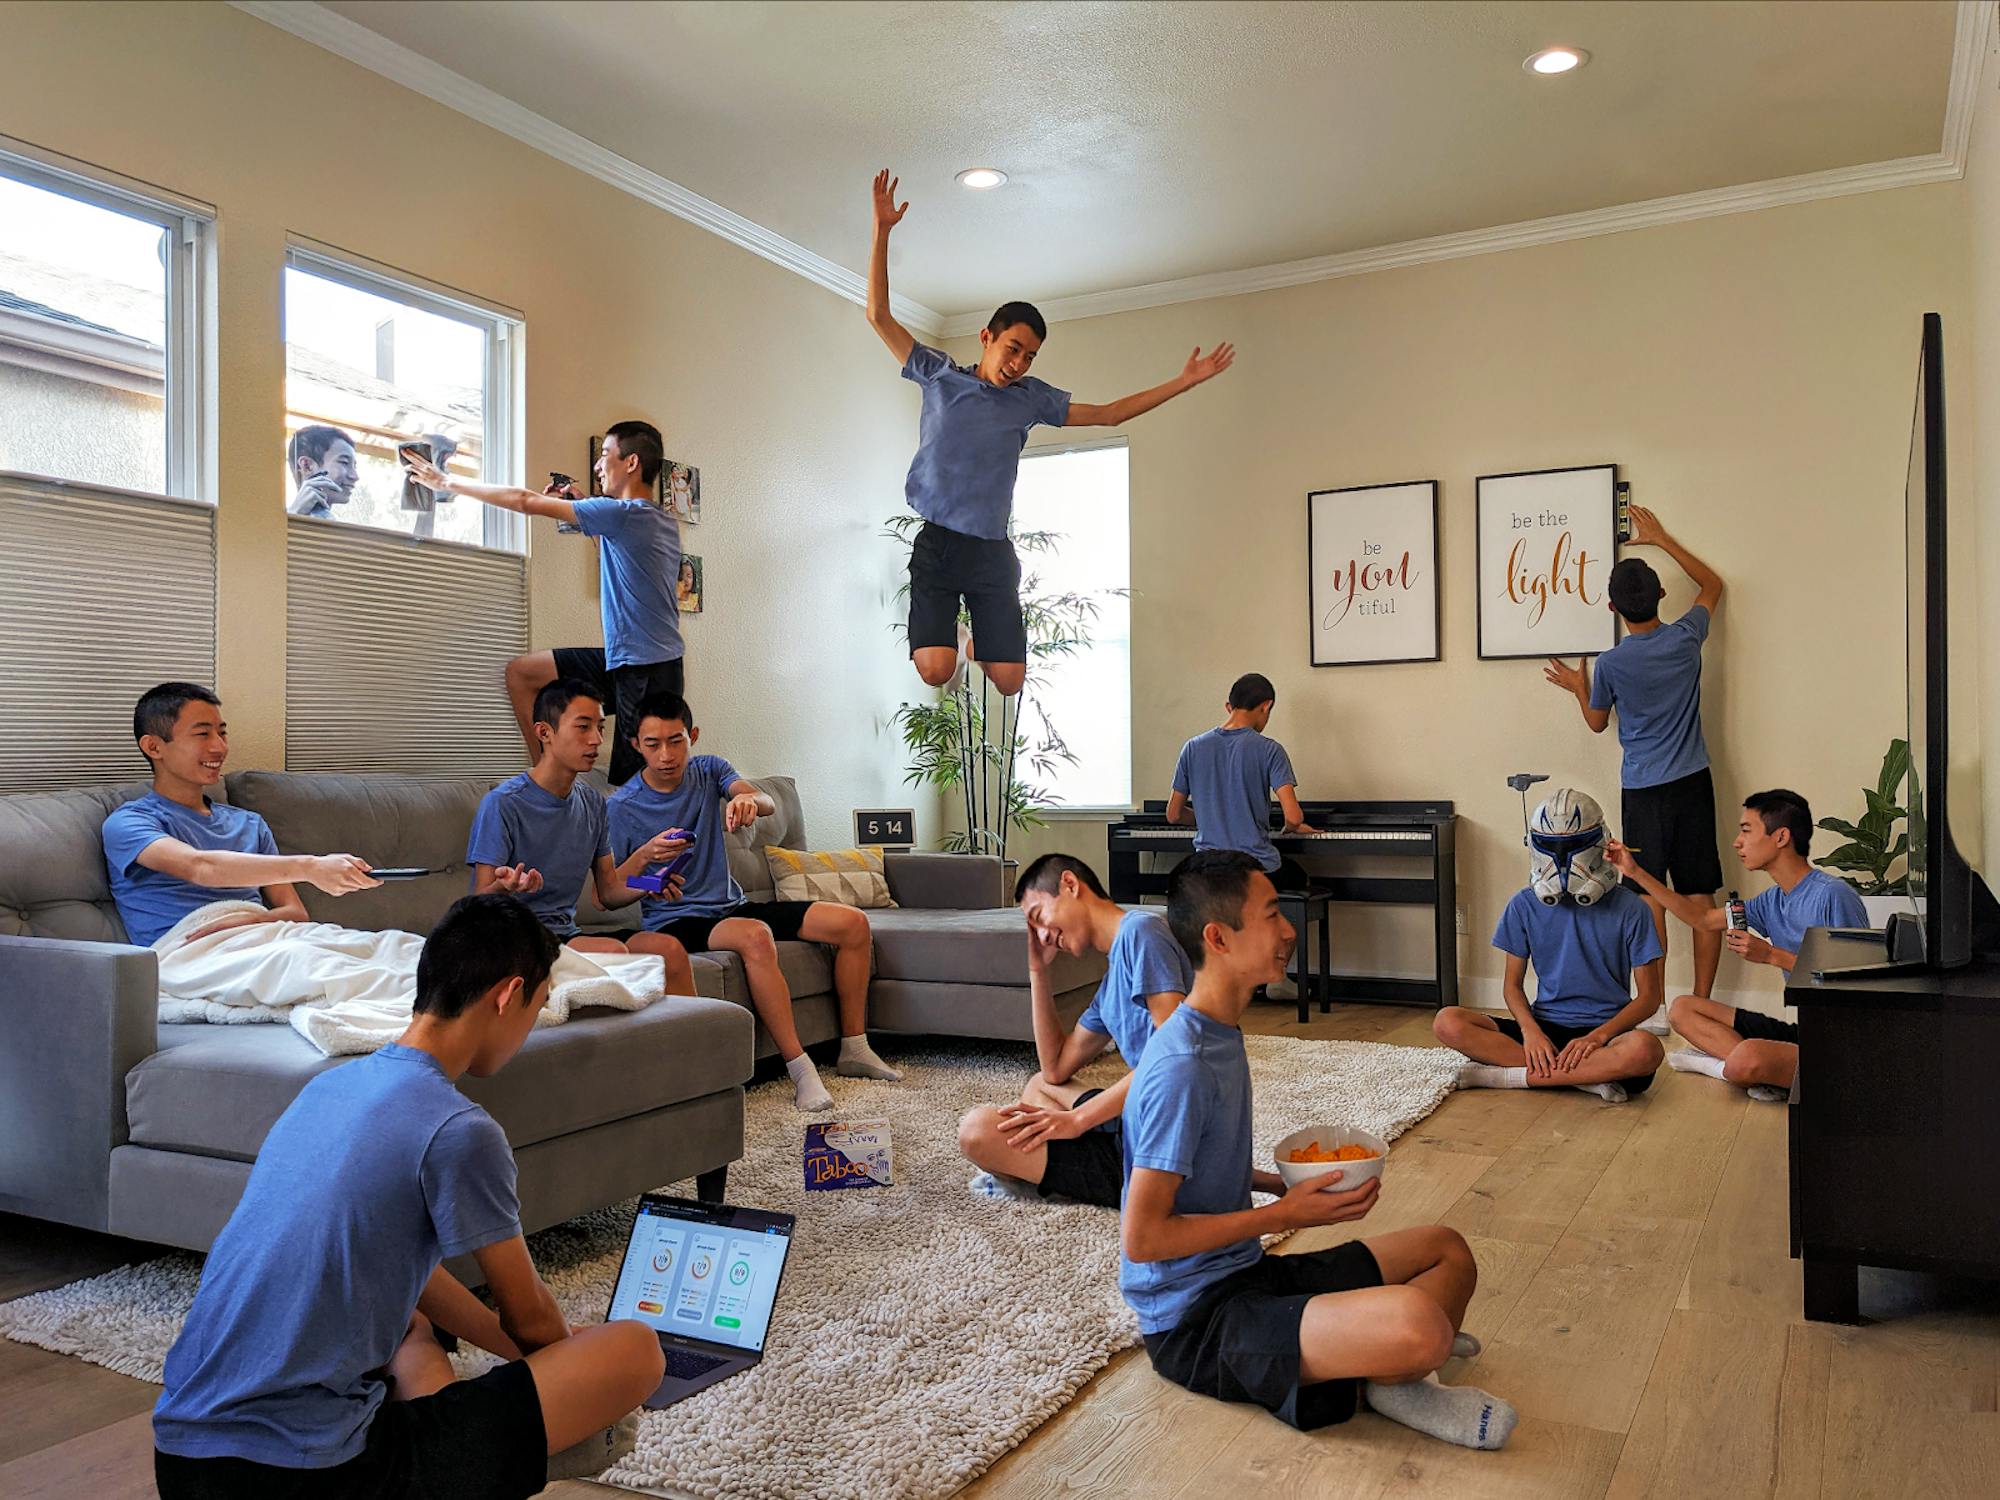 Multiples same young man in a blue t-shirt and dark shorts are superimposed performing various activities in a living room: typing on a laptop on the floor, jumping off a couch, wearing a stormtrooper helmet, and so on.